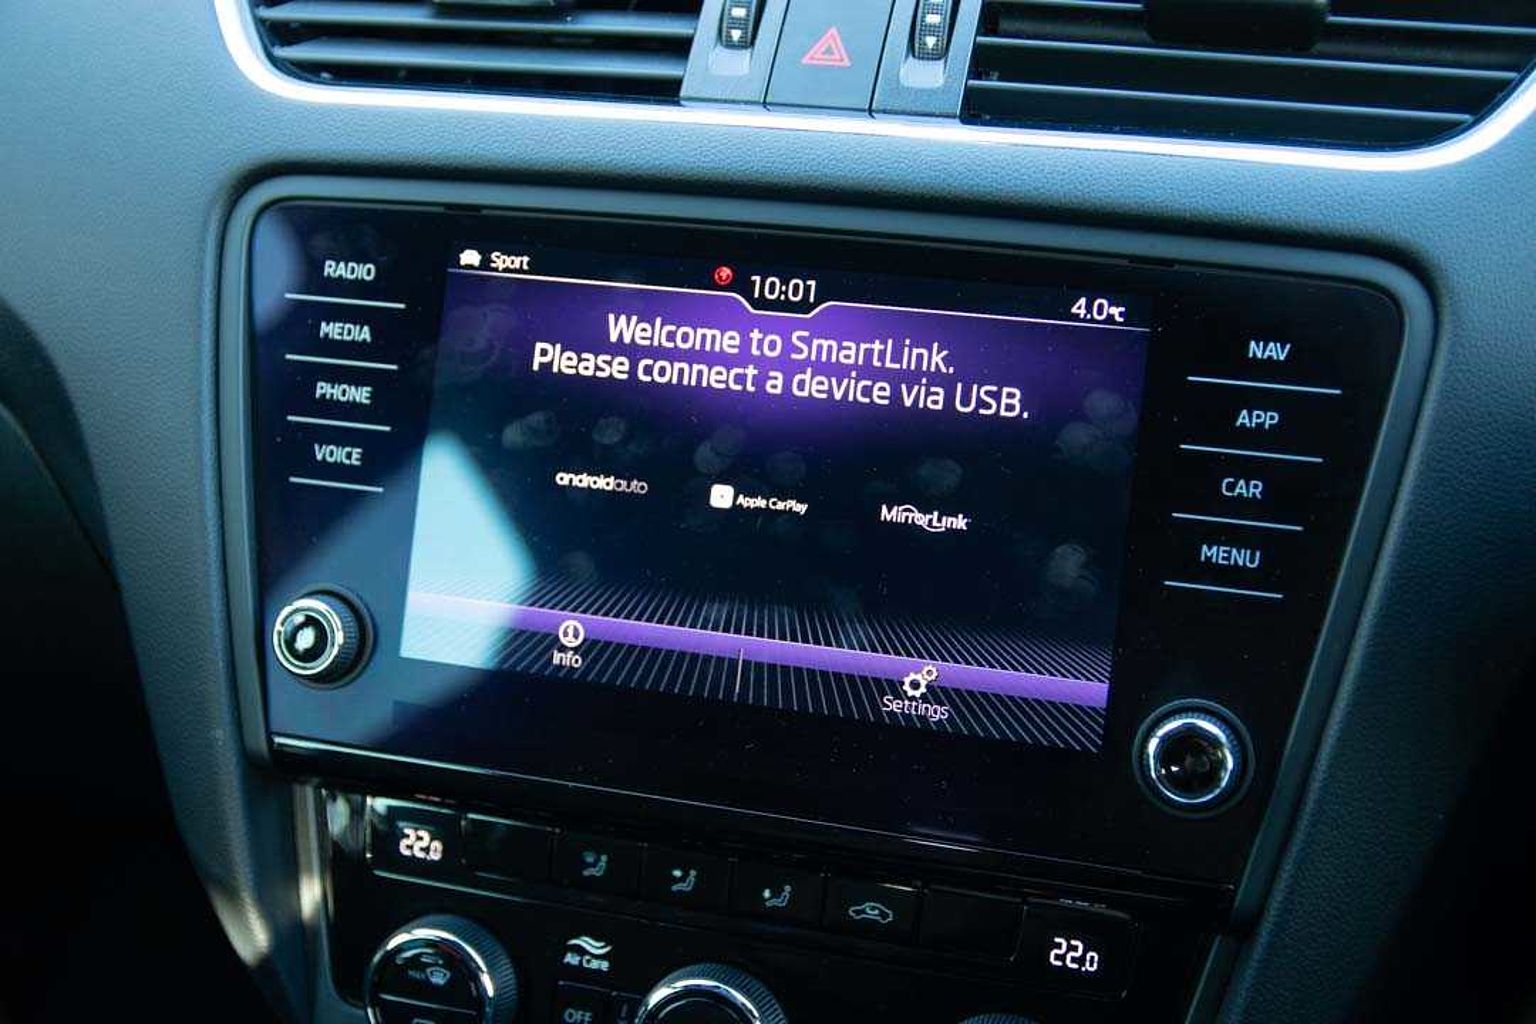 Skoda Octavia Navigation Solution with Apple Carplay and Android Auto